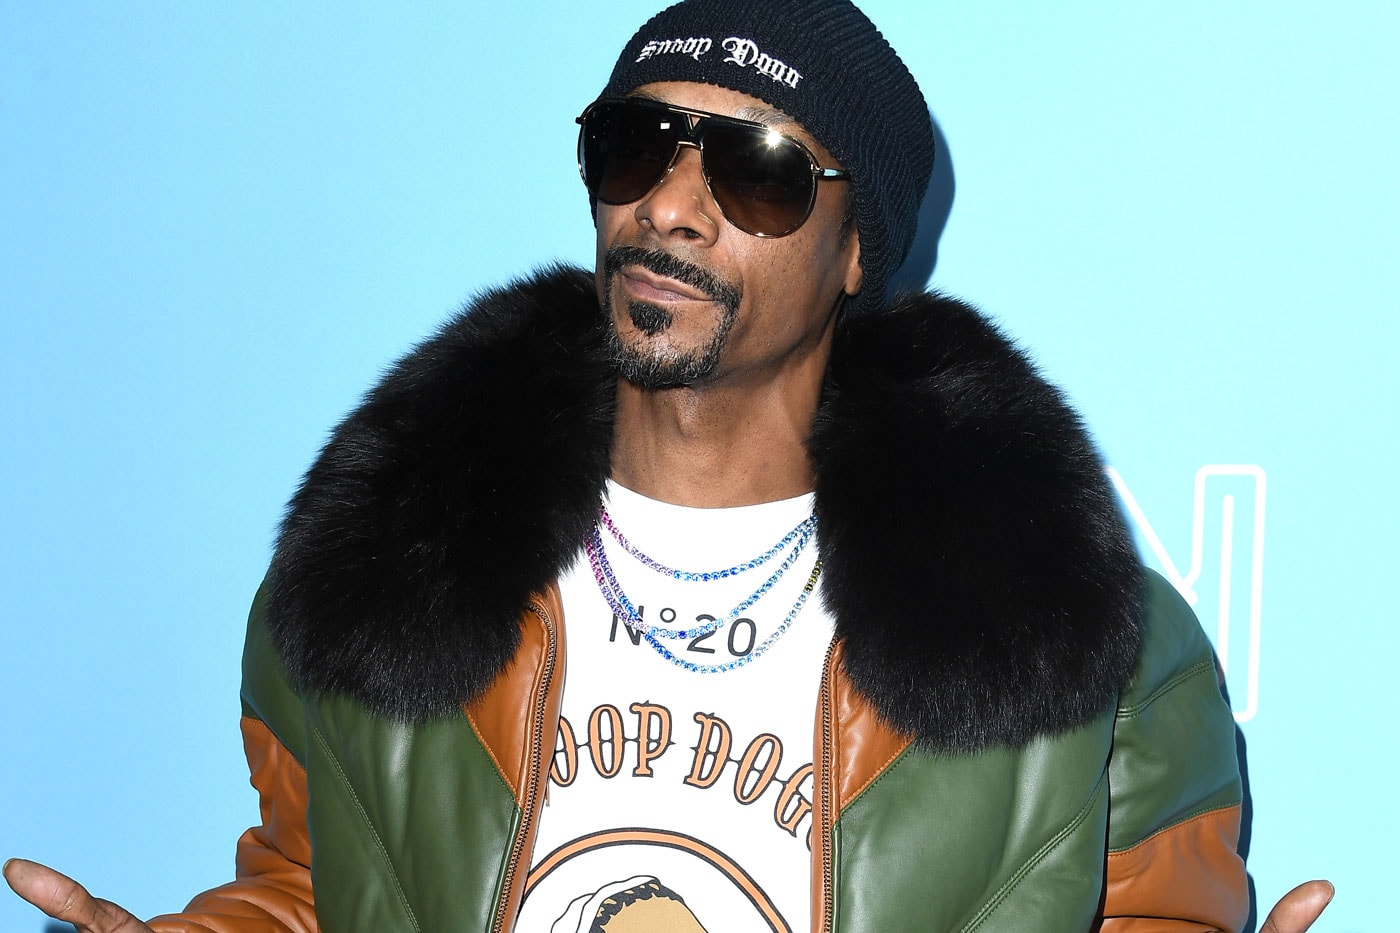 Snoop Dogg Acquires Death Row Records rapper hip hop mnrk music group label black future month black history month weed marijuana suge knight dr dre tupac shakur kanye west